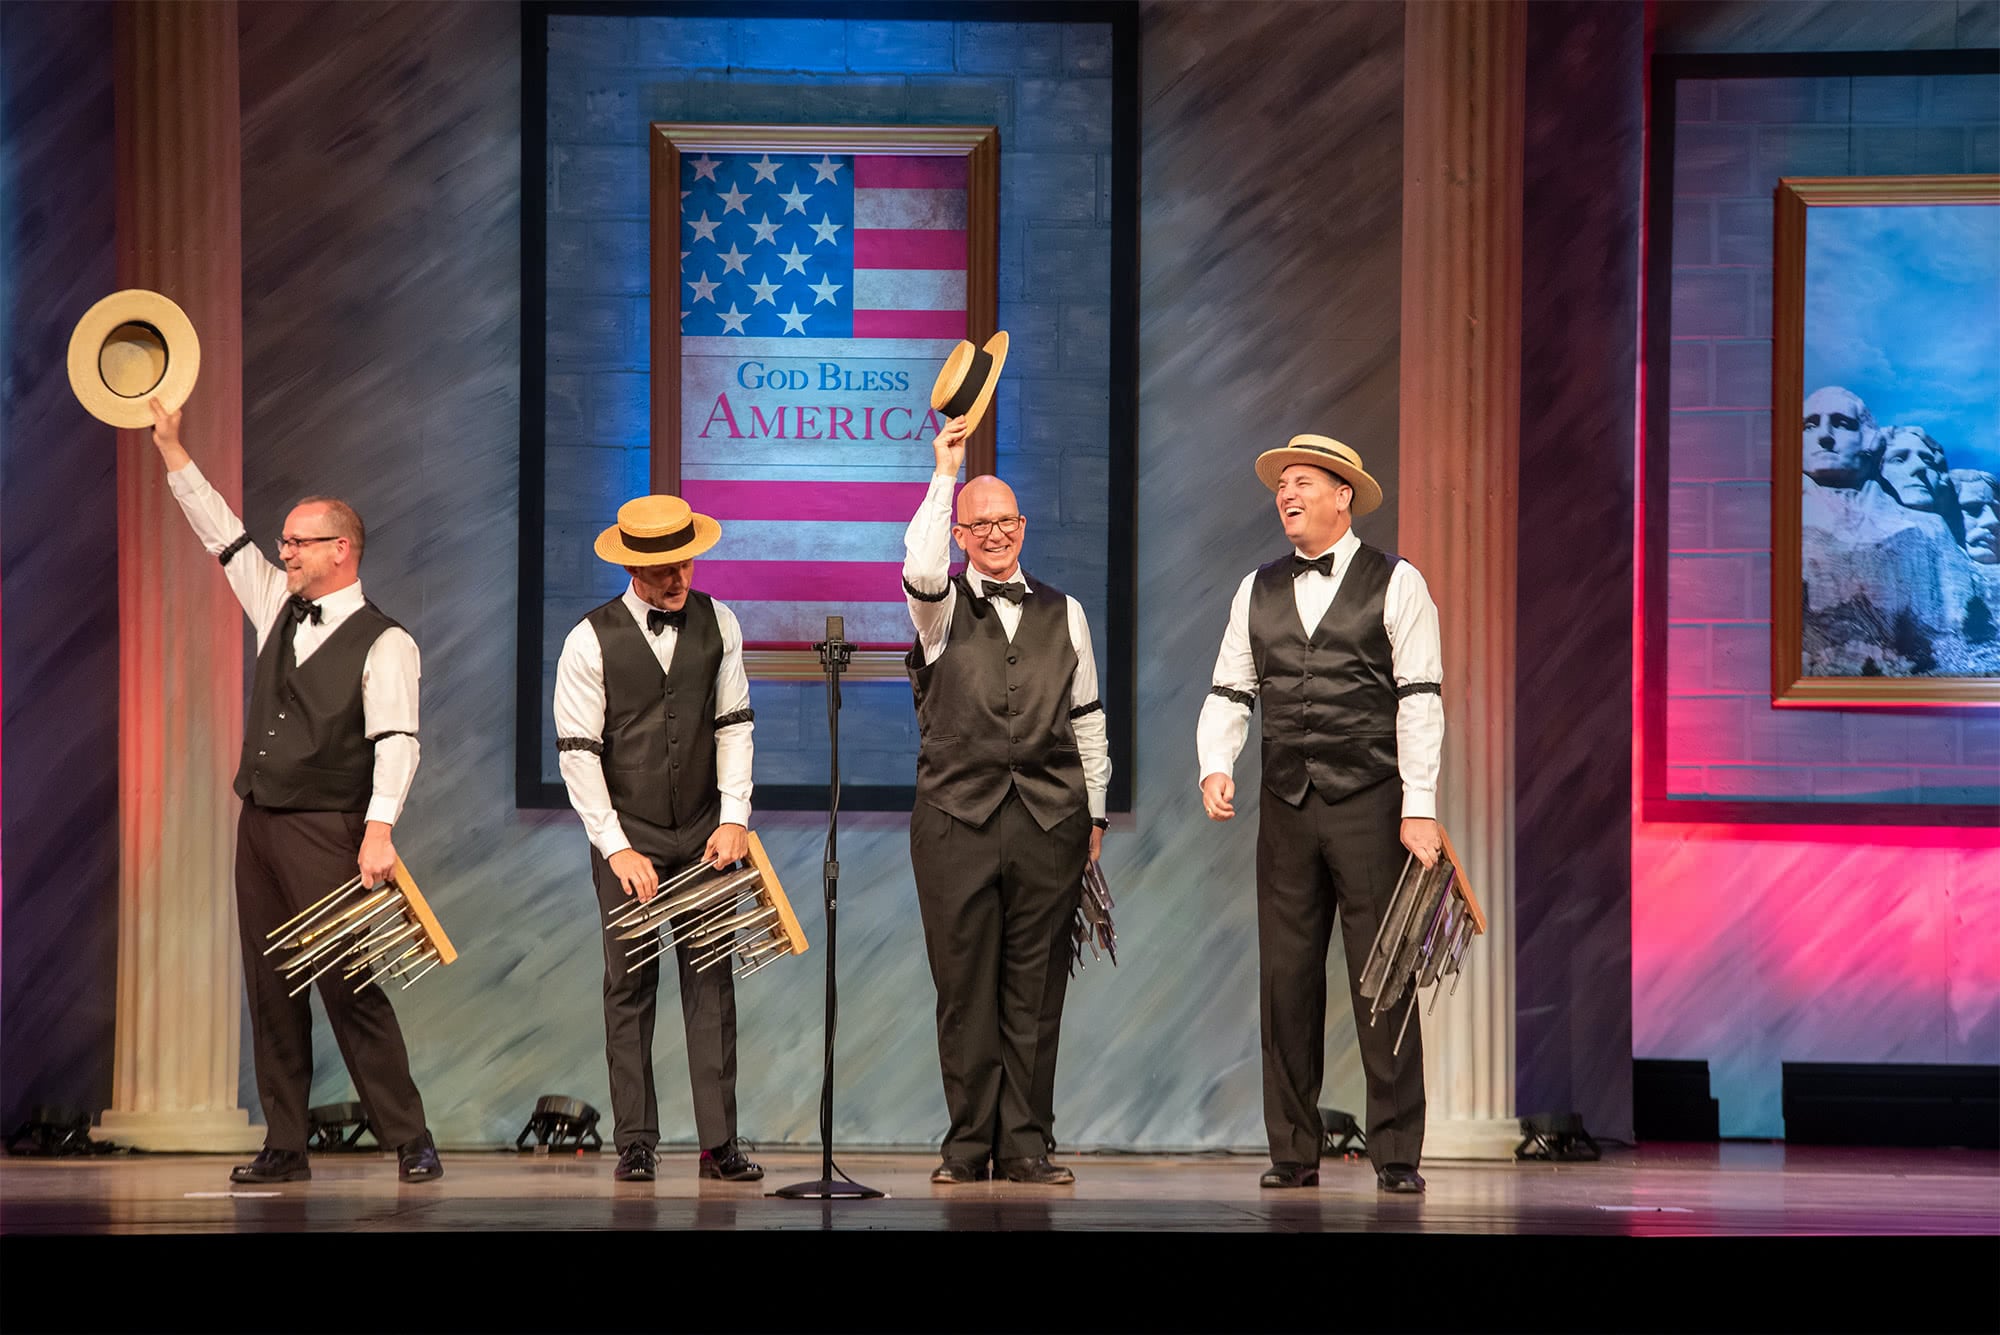 The Humdingers barbershop quartet wearing hats and vests and playing organ chimes.